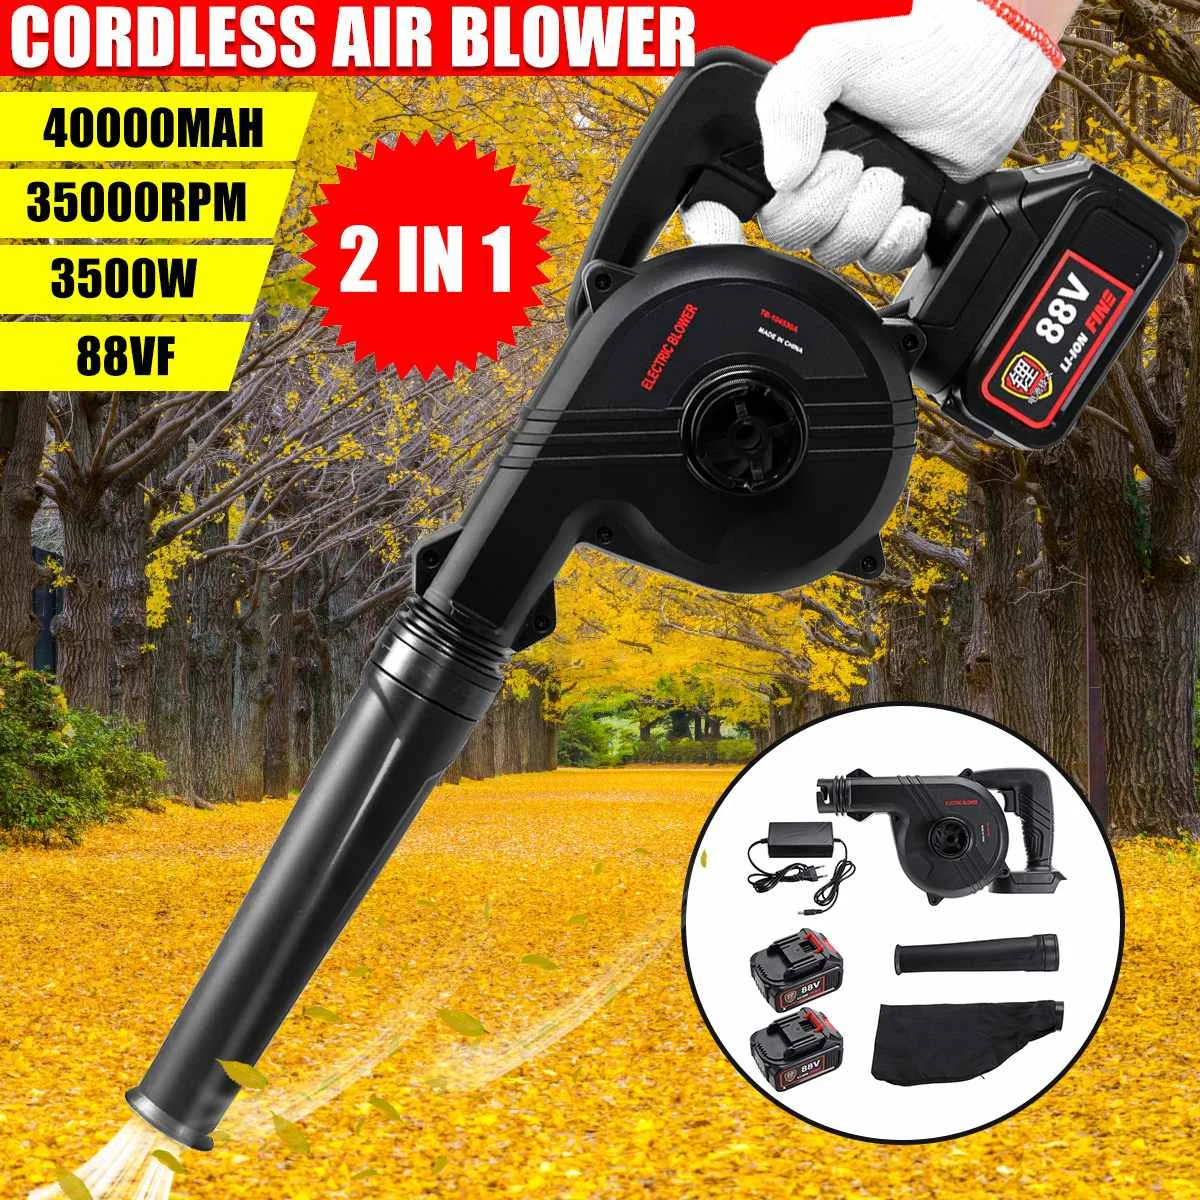 

3500W 2 In 1 Foldable Cordless Electric Air Blower Blowing Suction Leaf Blower Dust Cleaner Collector For Makita 18V Battery